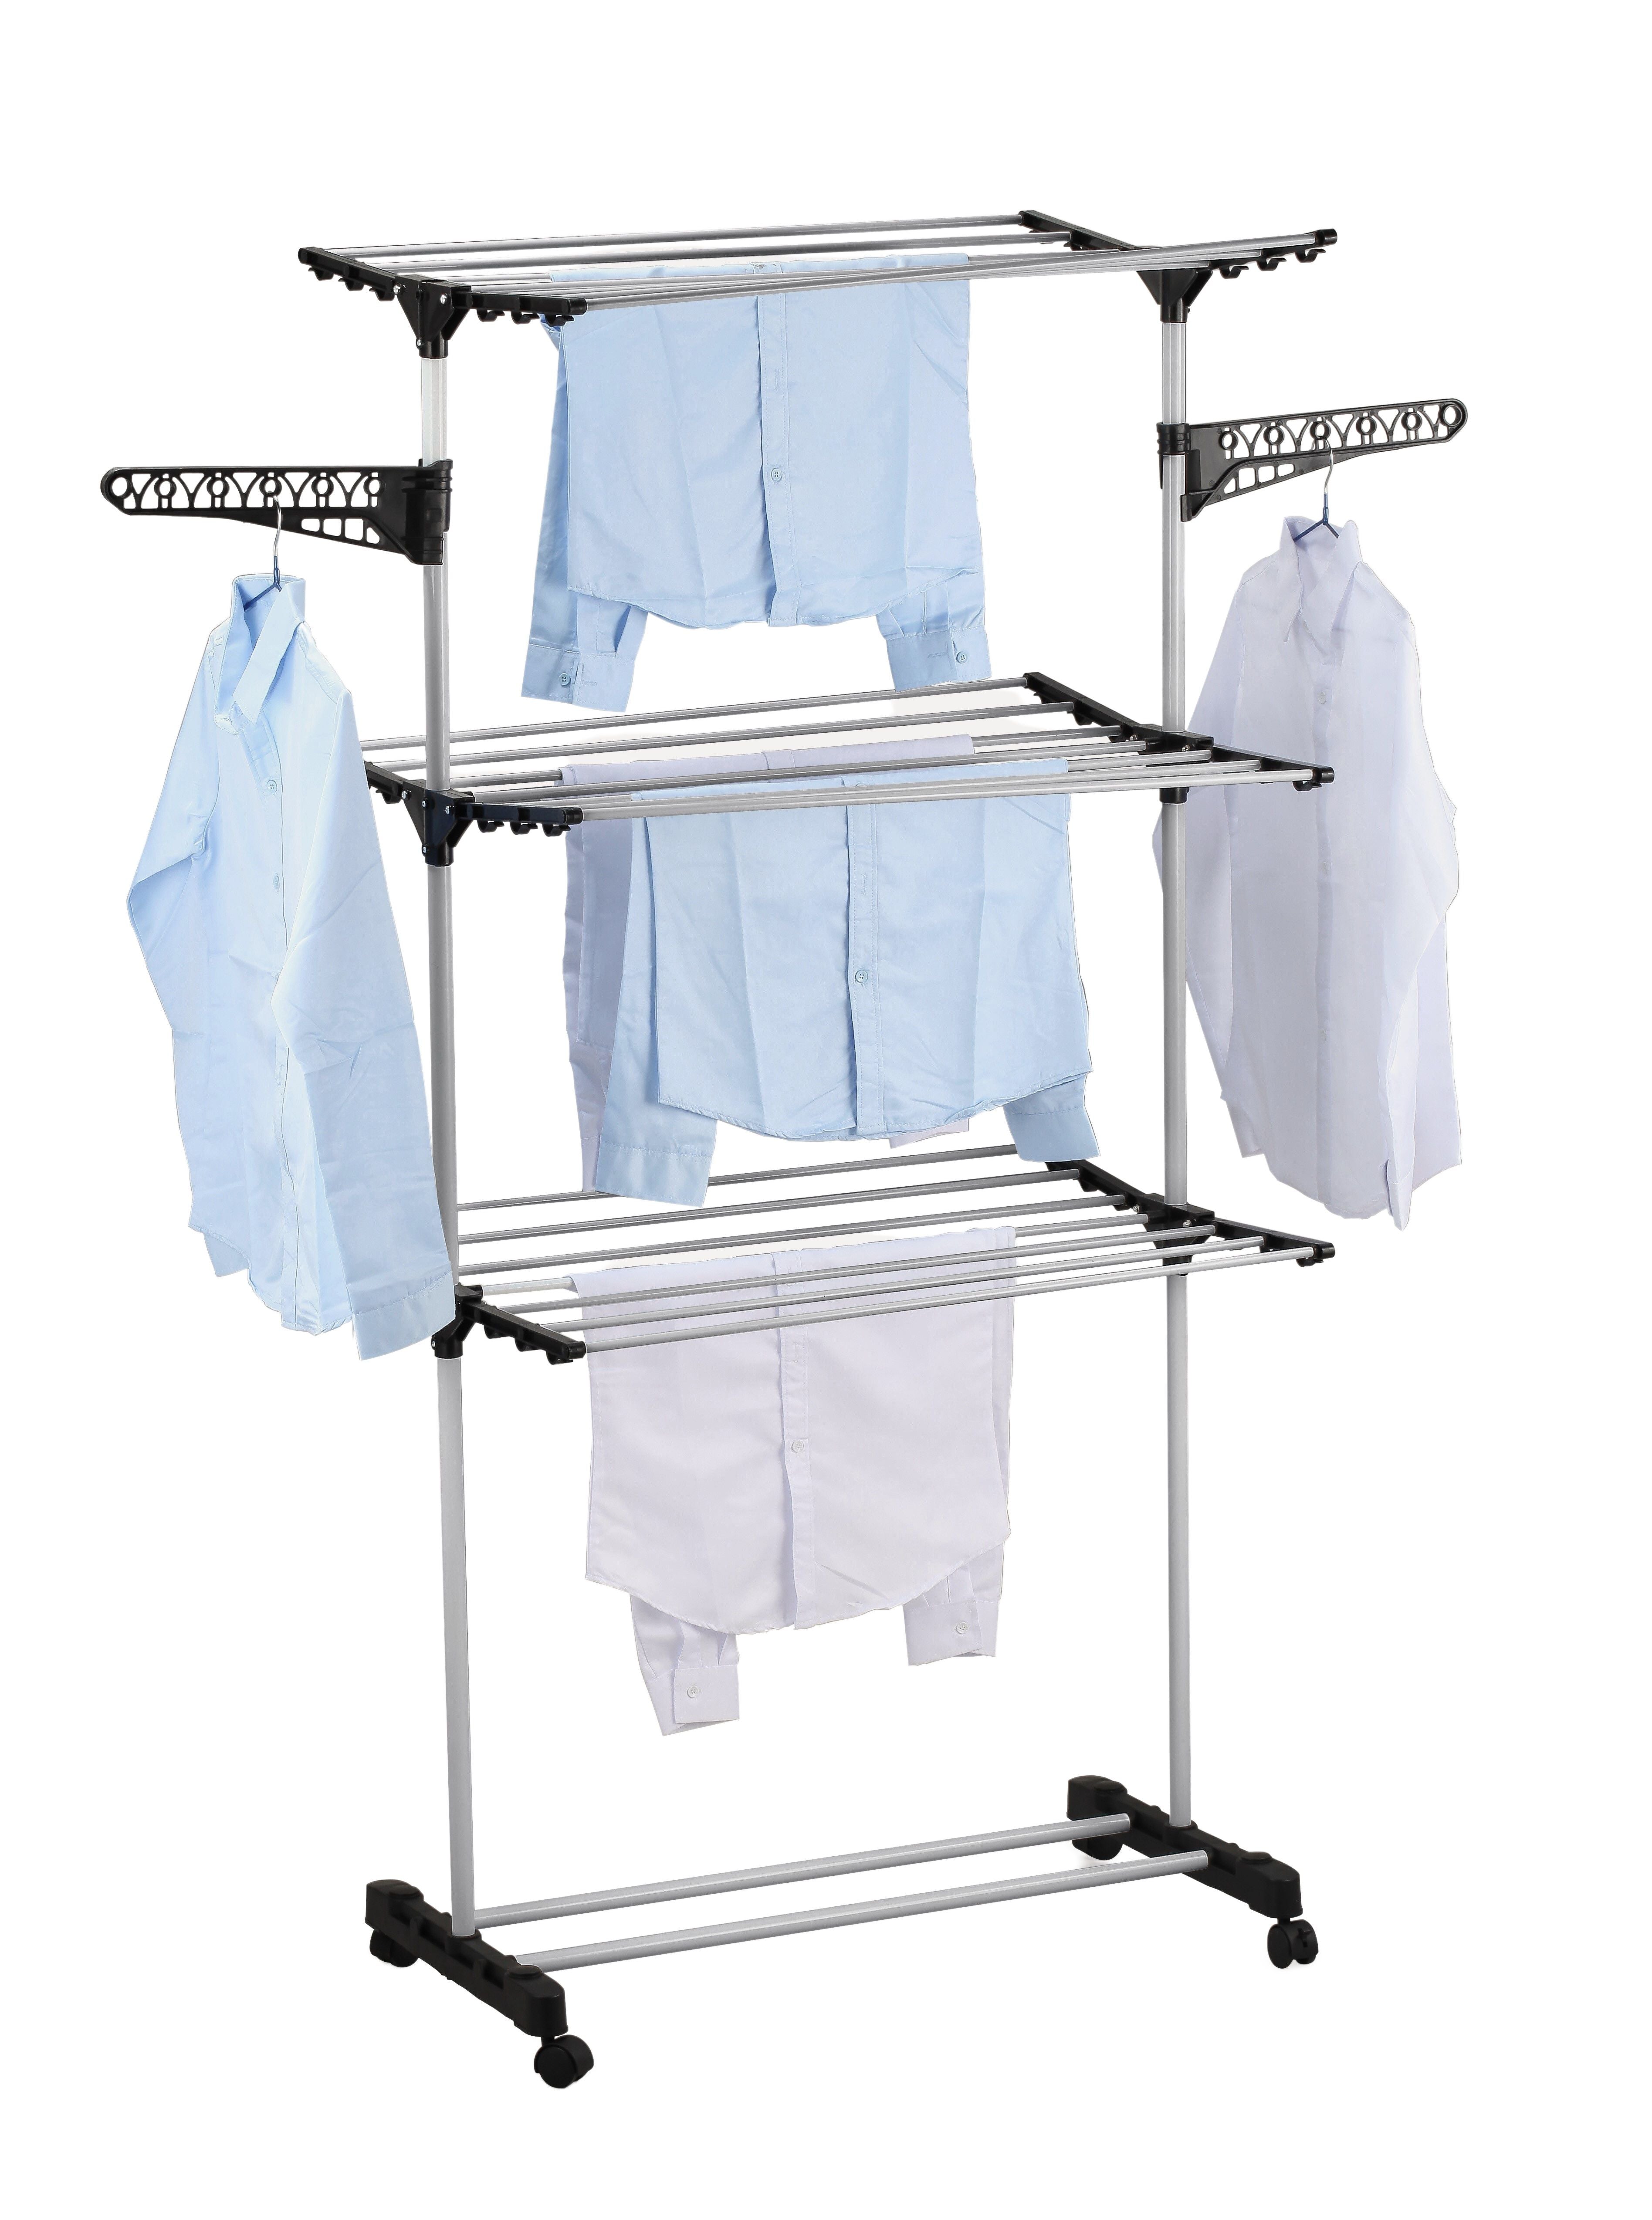 folding-3-tier-clothes-laundry-drying-rack-with-stainless-steel-tubes-for-indoor-outdoor-home